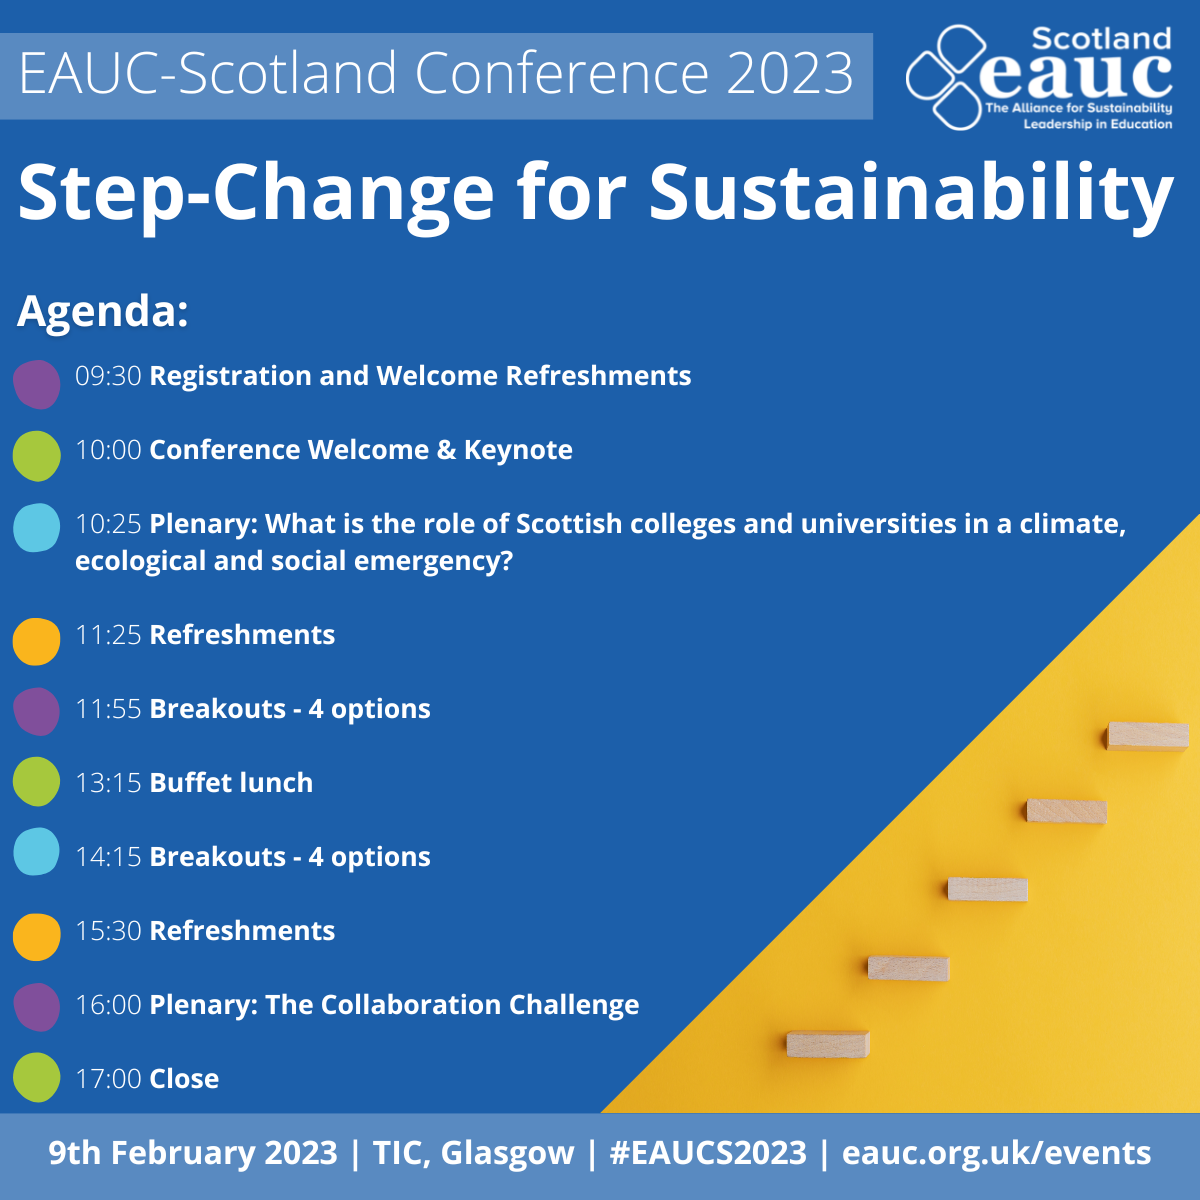 On a blue background white text reads "EAUC-Scotland Conference 2023, Step-Change for Sustainability". Next to this is the EAUC-Scotland logo. Beneath this is text reading "Agenda: 9.30: Registration and Welcome Refreshments. 10.00: Conference Welcome & Keynote. 10.25: Plenary: What is the role of Scottish colleges and universities in a climate, ecological and social emergency? 11.25: Refreshments. 11.55: Breakouts - 4 options. 13.15: Buffet lunch. 14.15: Breakouts - 4 options. 15.30: Refreshments. 16.00: Plenary: The Collaboration Challenge. 17.00: Close." At the bottom of the image, text reads "9th February 2023, TIC, Glasgow. #EAUCS2023 eauc.org.uk/events". Beside this is an image of a set of steps on a yellow background.